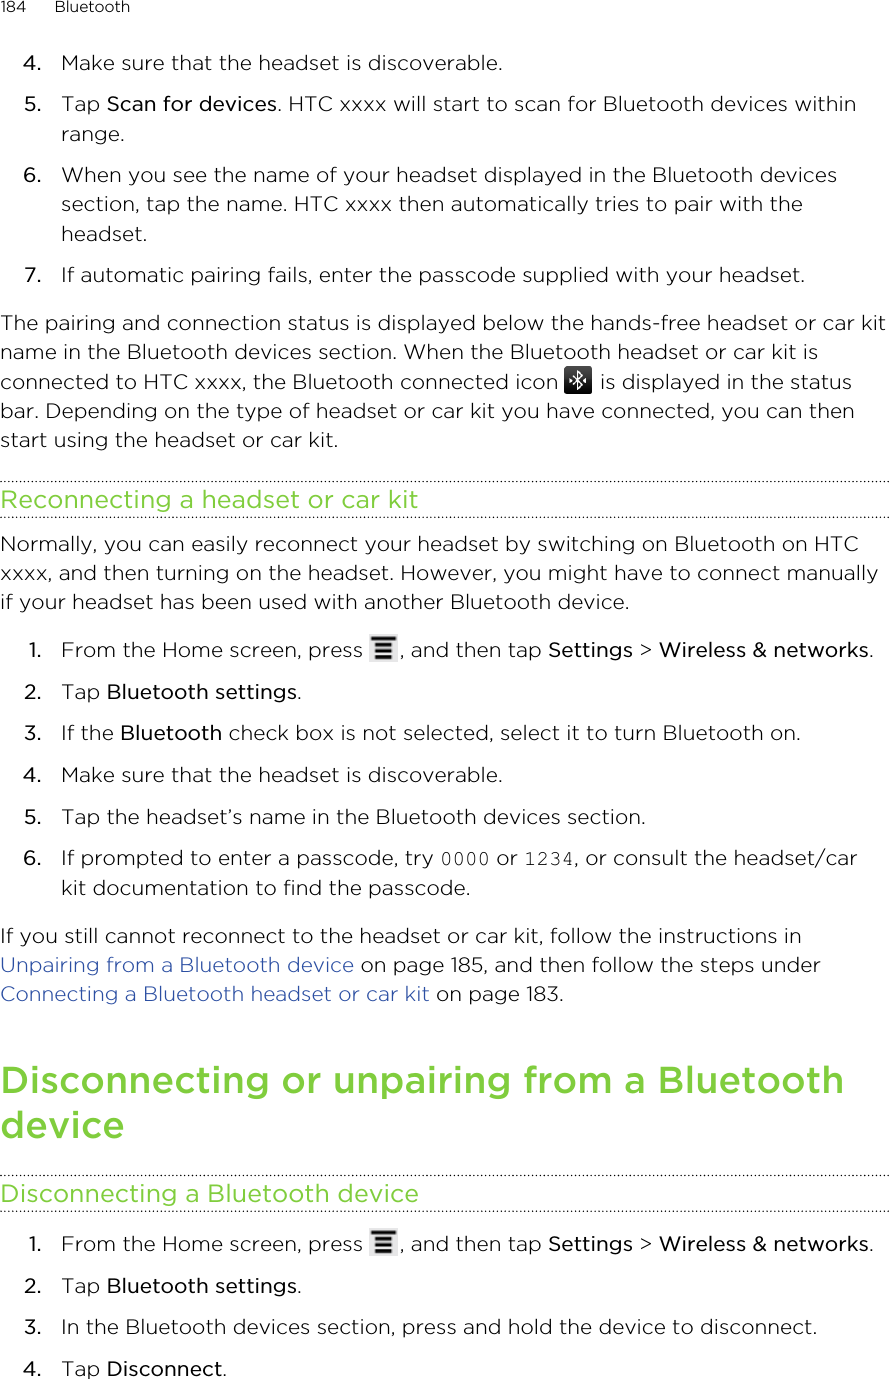 4. Make sure that the headset is discoverable.5. Tap Scan for devices. HTC xxxx will start to scan for Bluetooth devices withinrange.6. When you see the name of your headset displayed in the Bluetooth devicessection, tap the name. HTC xxxx then automatically tries to pair with theheadset.7. If automatic pairing fails, enter the passcode supplied with your headset.The pairing and connection status is displayed below the hands-free headset or car kitname in the Bluetooth devices section. When the Bluetooth headset or car kit isconnected to HTC xxxx, the Bluetooth connected icon   is displayed in the statusbar. Depending on the type of headset or car kit you have connected, you can thenstart using the headset or car kit.Reconnecting a headset or car kitNormally, you can easily reconnect your headset by switching on Bluetooth on HTCxxxx, and then turning on the headset. However, you might have to connect manuallyif your headset has been used with another Bluetooth device.1. From the Home screen, press  , and then tap Settings &gt; Wireless &amp; networks.2. Tap Bluetooth settings.3. If the Bluetooth check box is not selected, select it to turn Bluetooth on.4. Make sure that the headset is discoverable.5. Tap the headset’s name in the Bluetooth devices section.6. If prompted to enter a passcode, try 0000 or 1234, or consult the headset/carkit documentation to find the passcode.If you still cannot reconnect to the headset or car kit, follow the instructions in Unpairing from a Bluetooth device on page 185, and then follow the steps under Connecting a Bluetooth headset or car kit on page 183.Disconnecting or unpairing from a BluetoothdeviceDisconnecting a Bluetooth device1. From the Home screen, press  , and then tap Settings &gt; Wireless &amp; networks.2. Tap Bluetooth settings.3. In the Bluetooth devices section, press and hold the device to disconnect.4. Tap Disconnect.184 Bluetooth